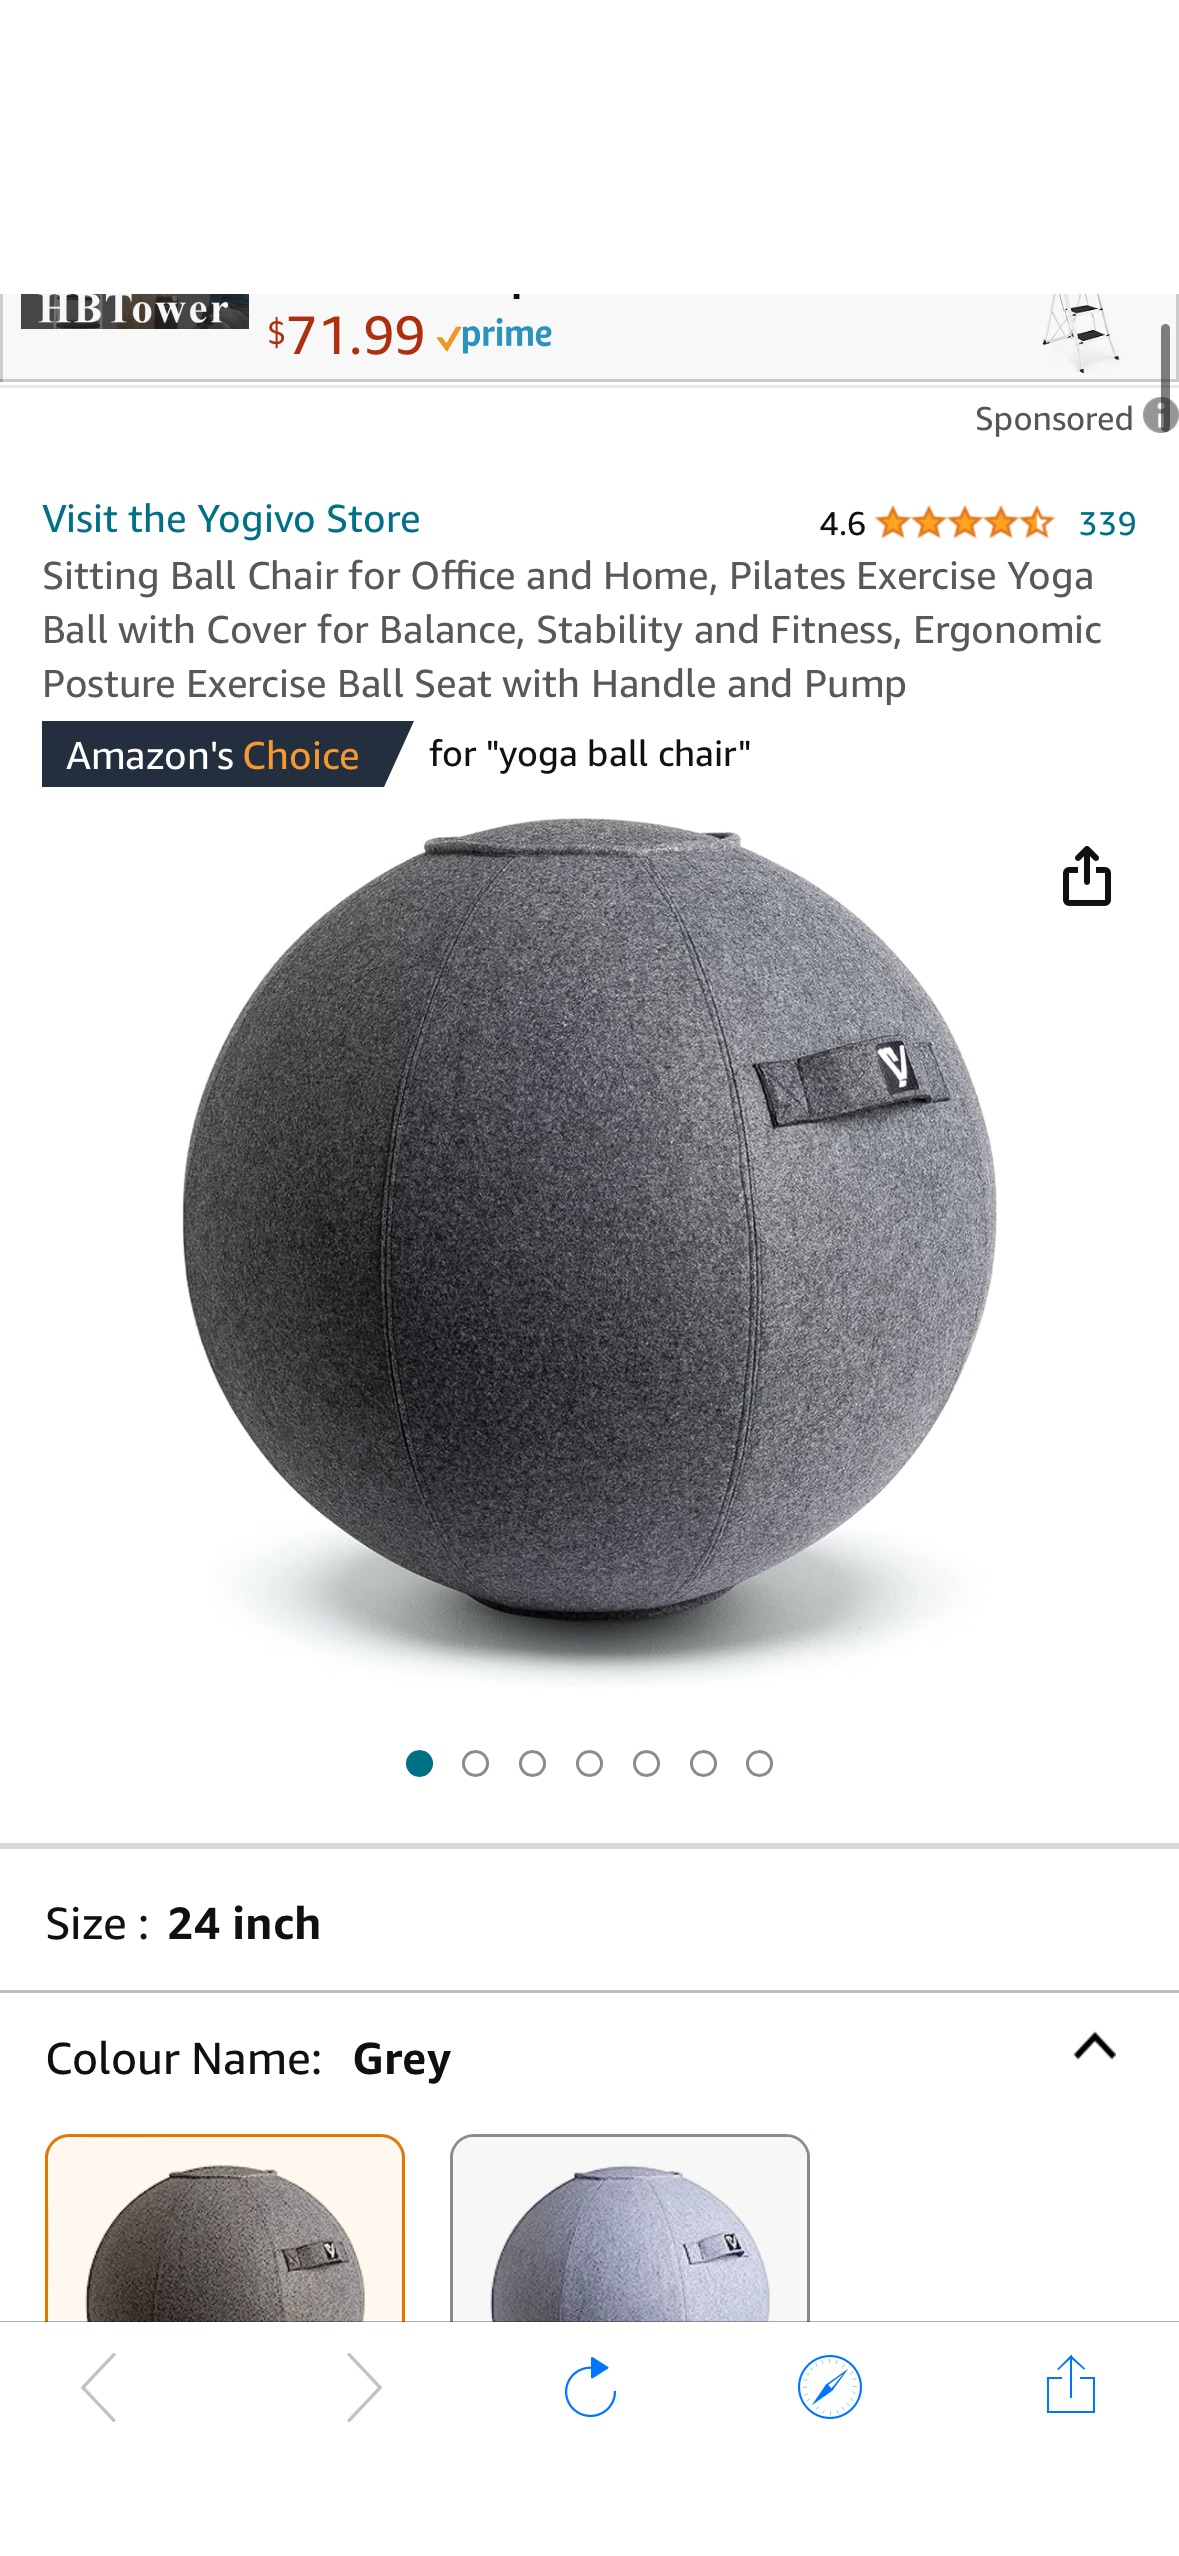 Sitting Ball Chair for Office and Home, Pilates Exercise Yoga Ball with Cover for Balance, Stability and Fitness, Ergonomic Posture Exercise Ball Seat with Handle and Pump (Gray, 24 in) : Amazon.ca: S